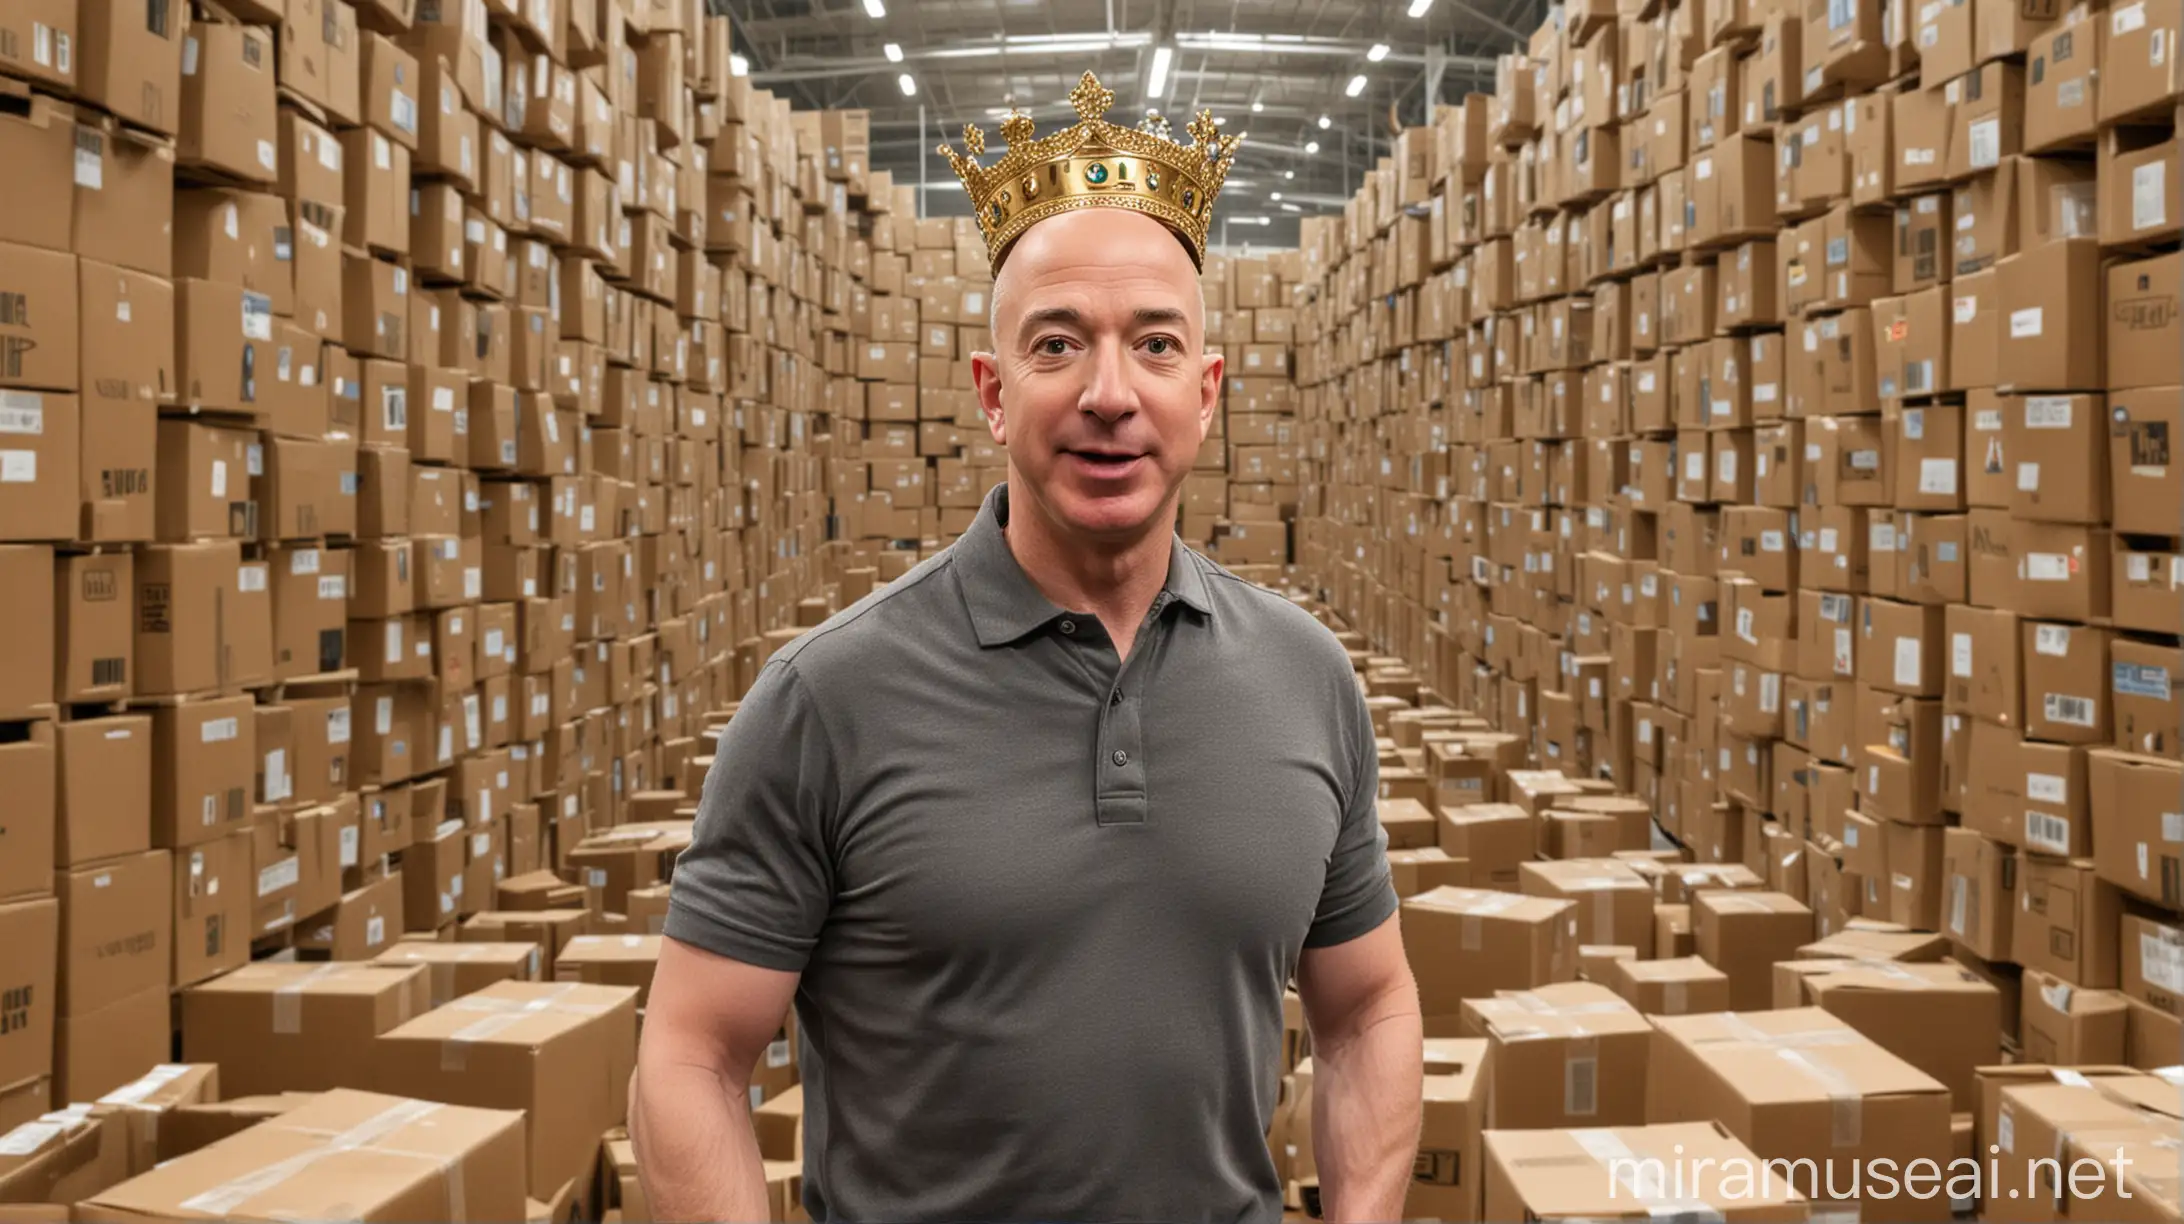 create a youtube thumbnail with jeff bezos in the front middle wearing crown, with background of thousand amazon boxes